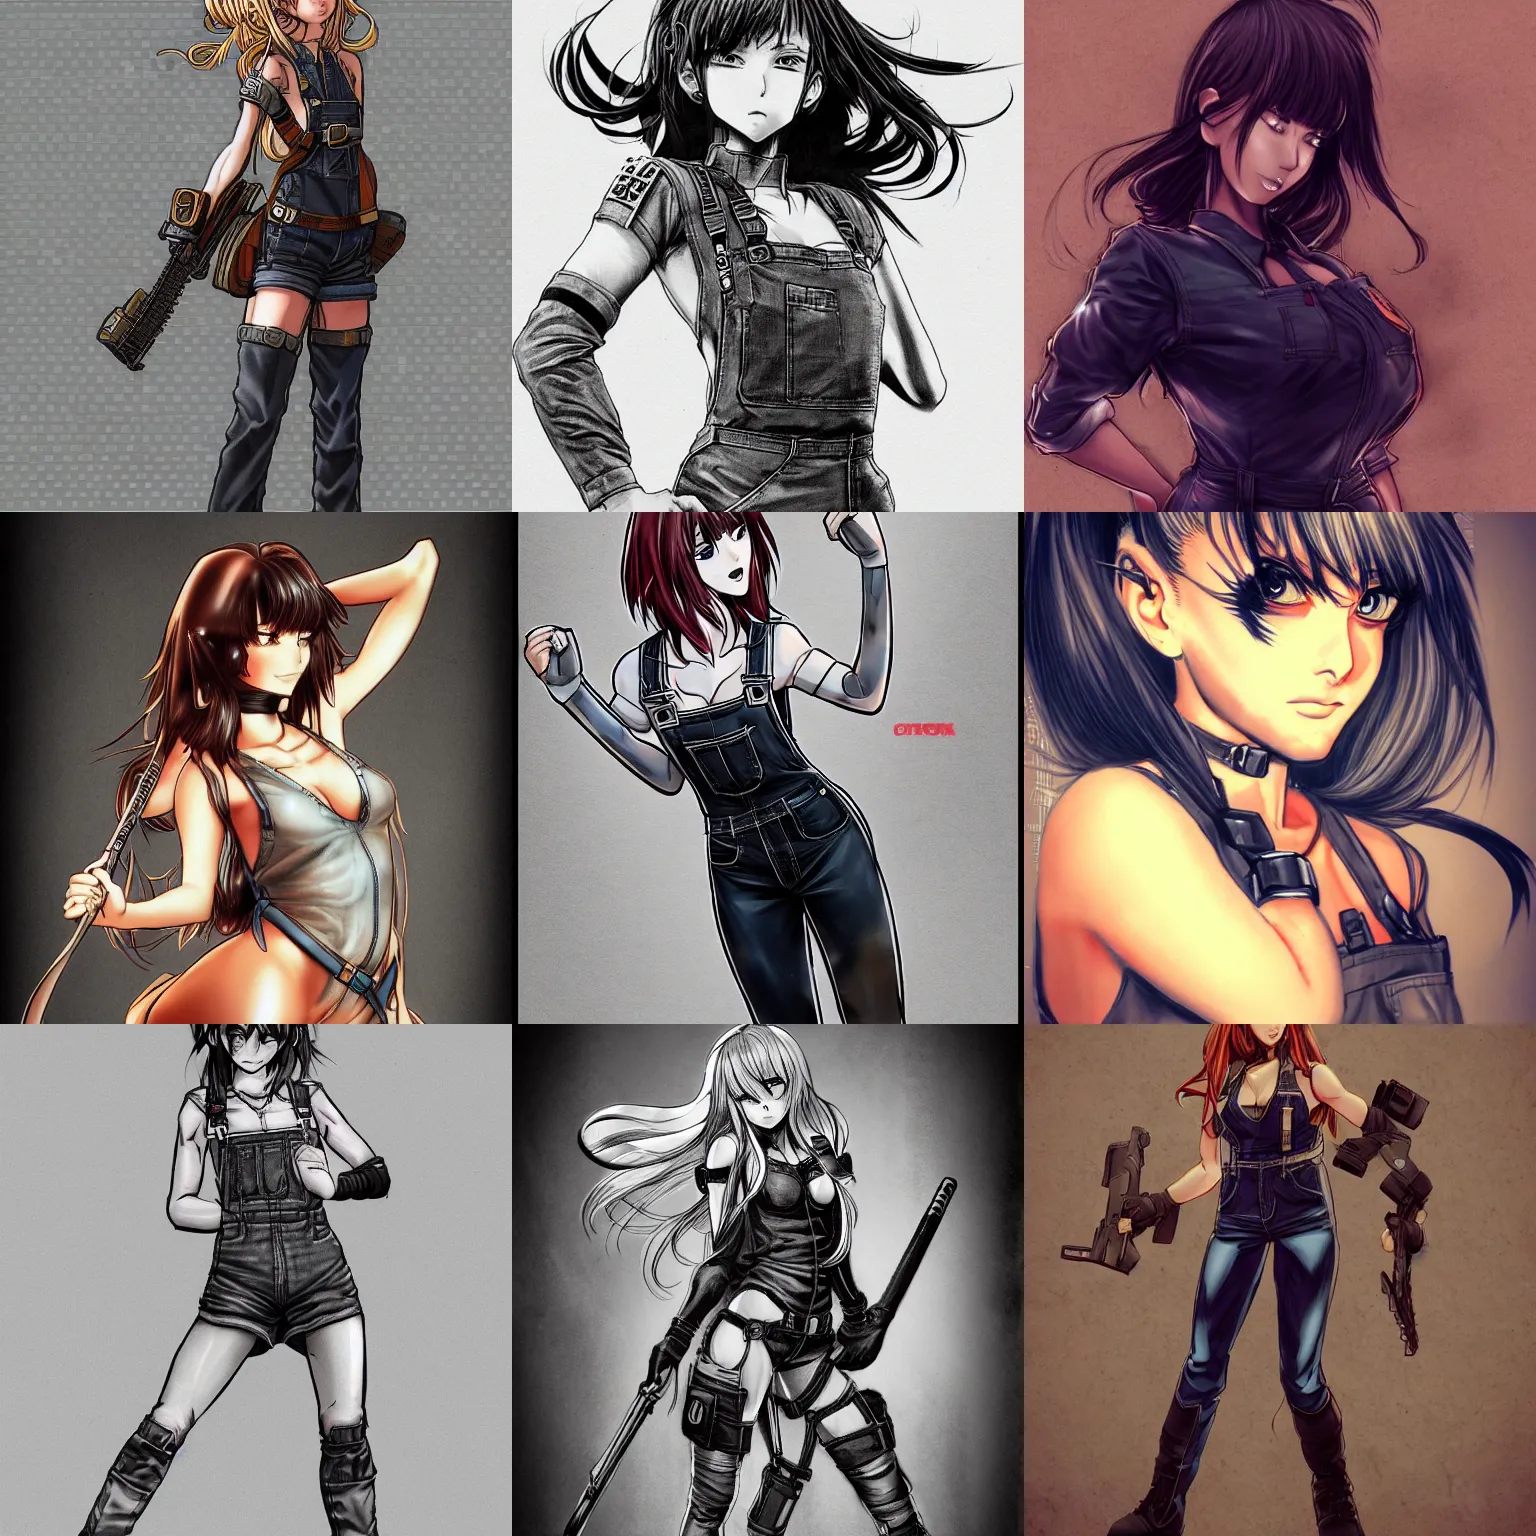 Muscular Anime-Style Character in Dynamic Fighting Pose | AI Art Generator  | Easy-Peasy.AI